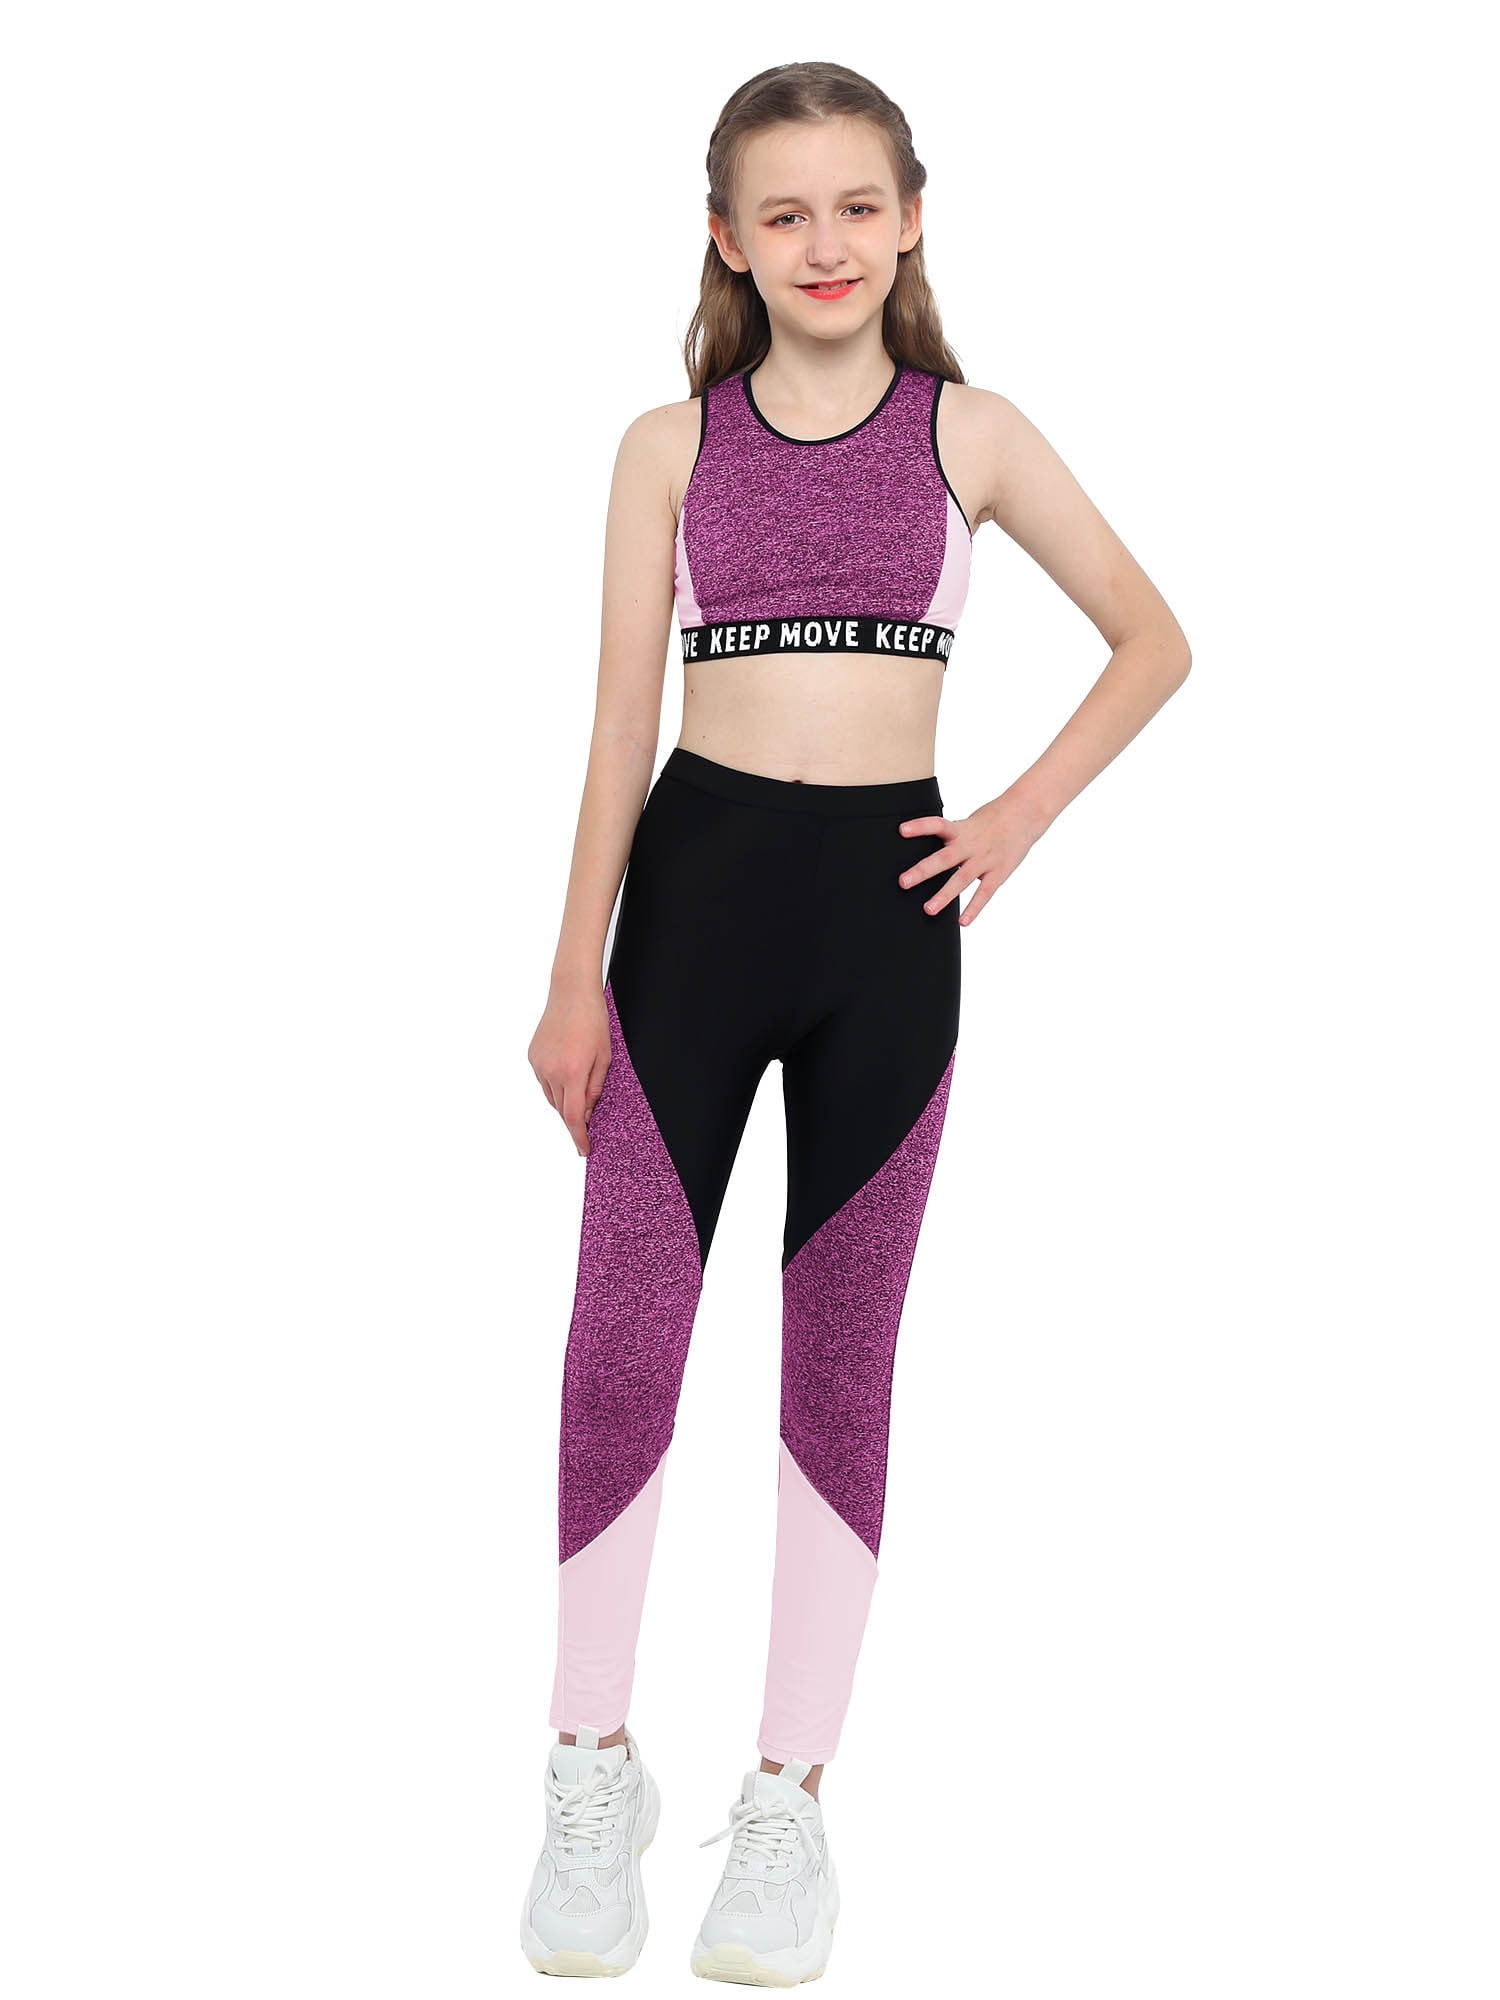 Aislor Kids Girls Two Piece Athletic Outfit Sports Bra Crop Top